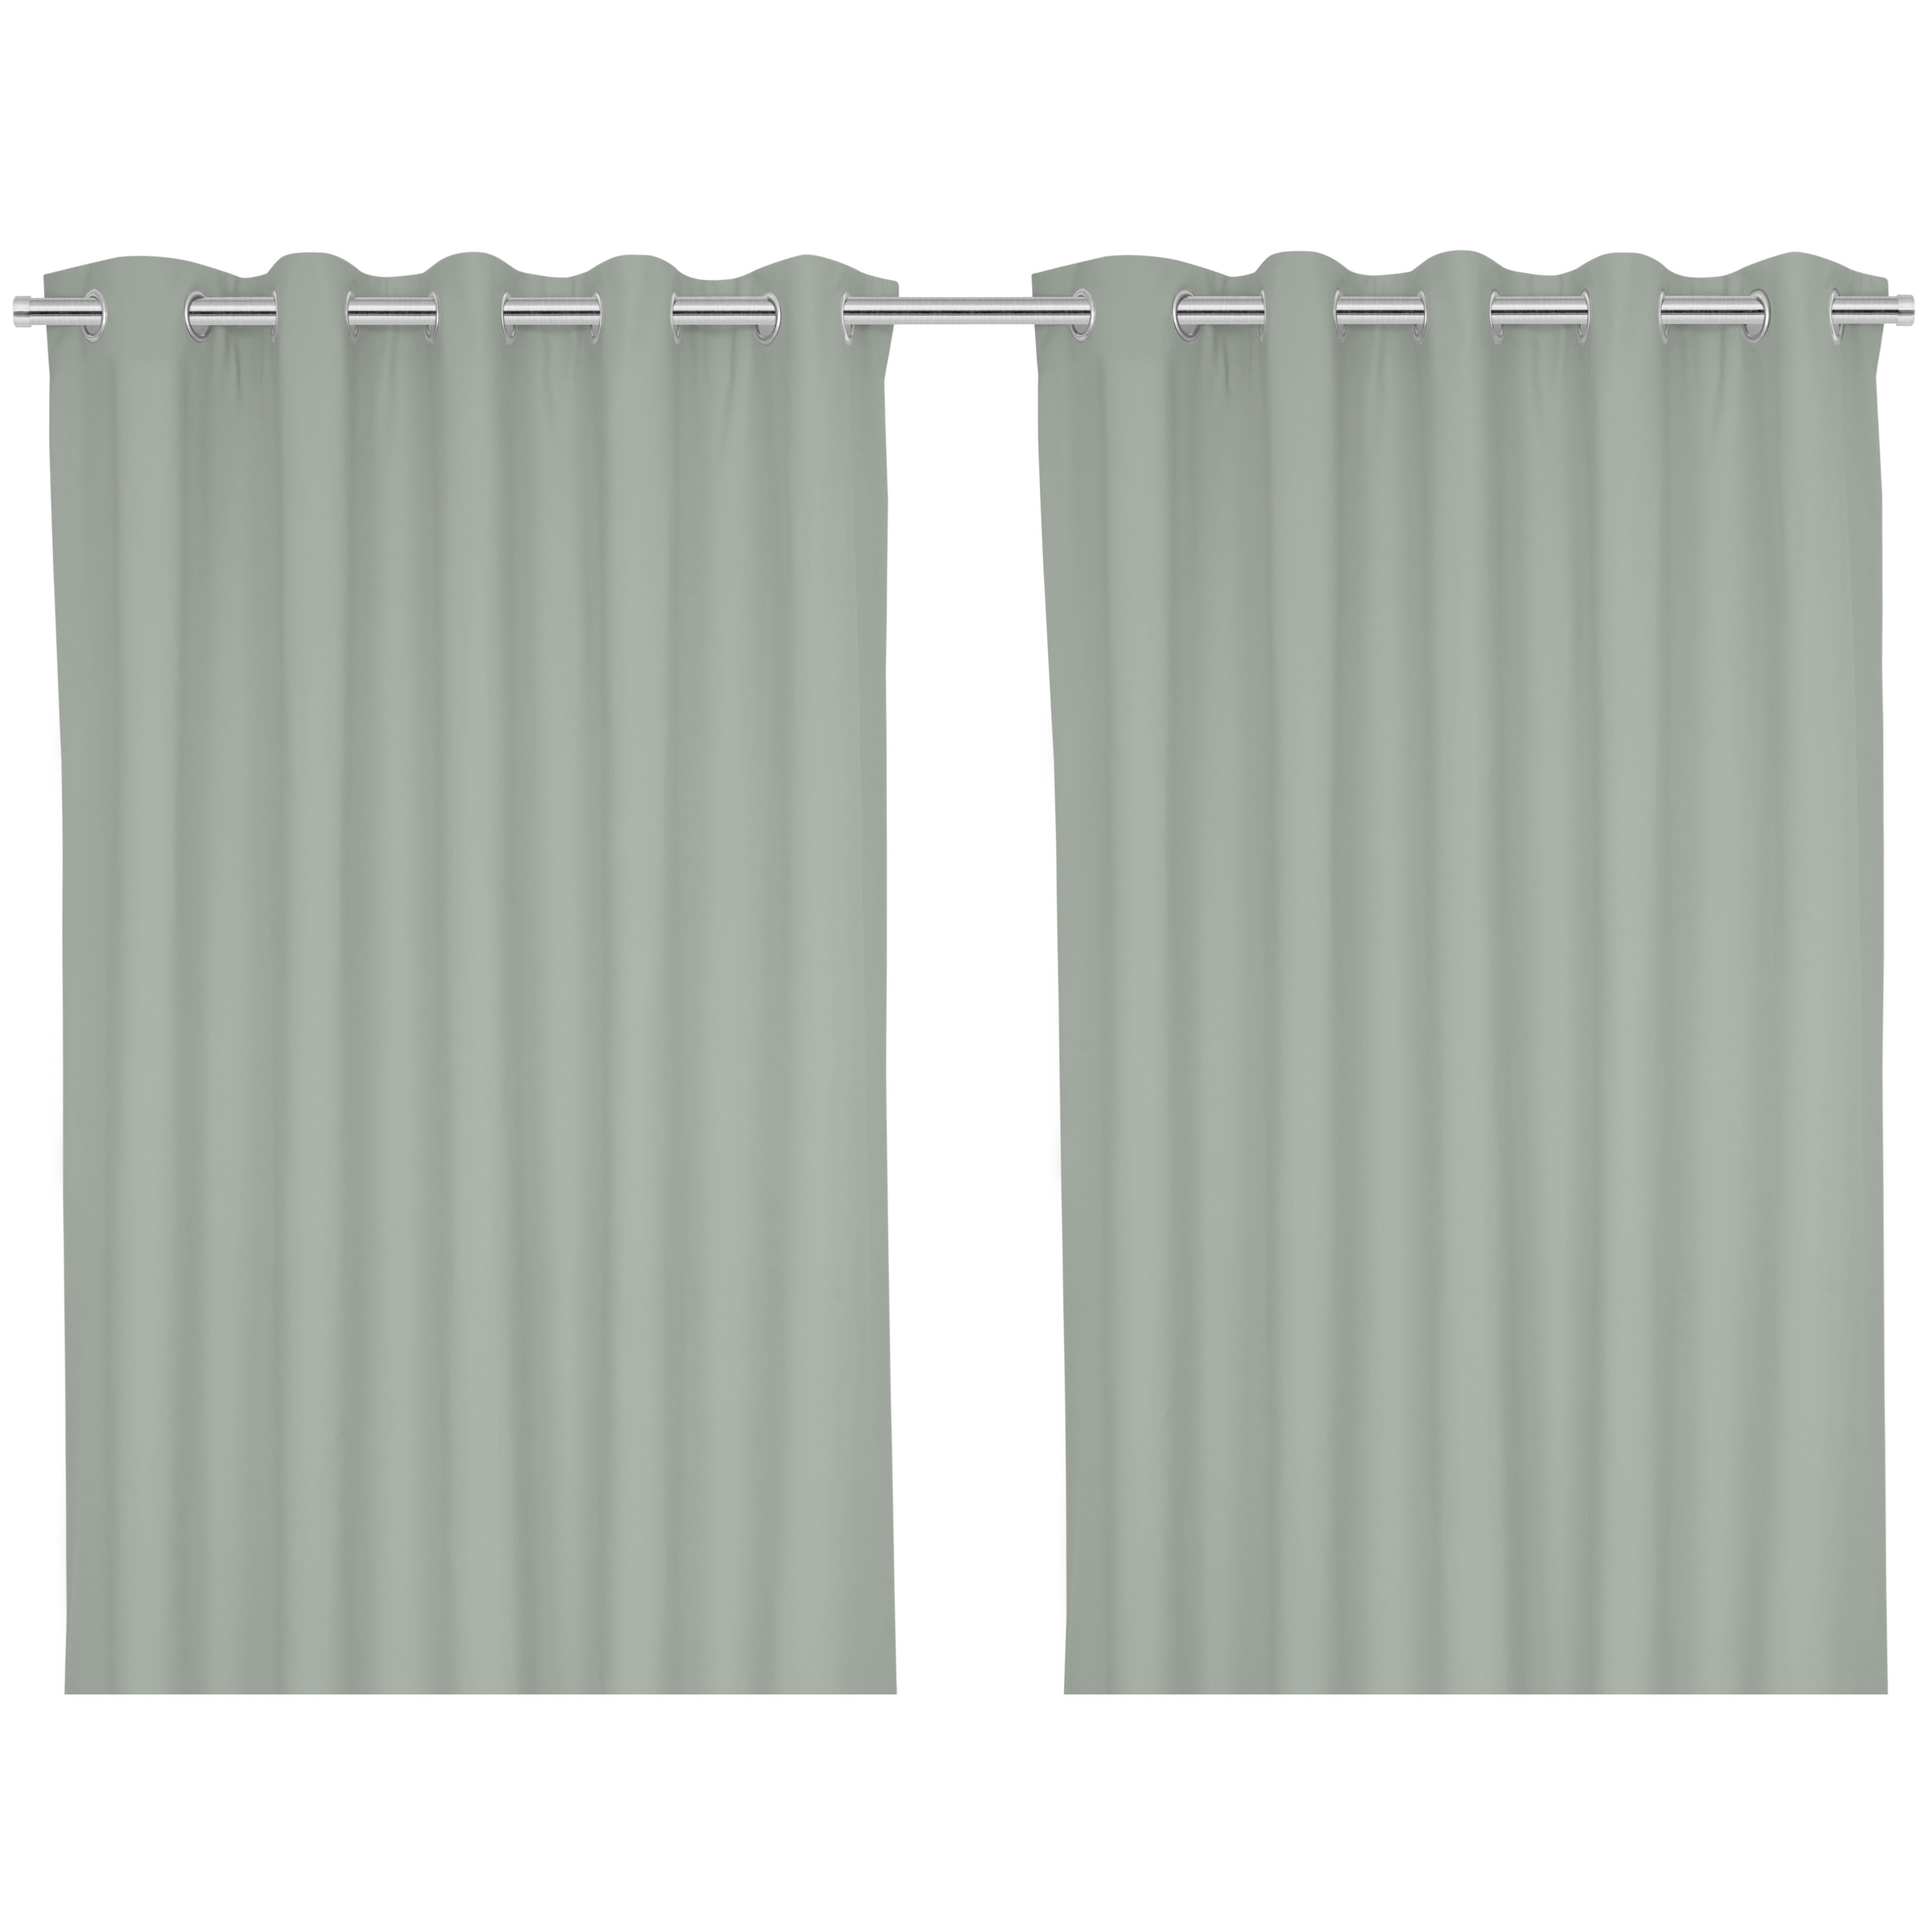 Hiva Light grey Solid dyed Lined Eyelet Curtain (W)117cm (L)137cm, Pair